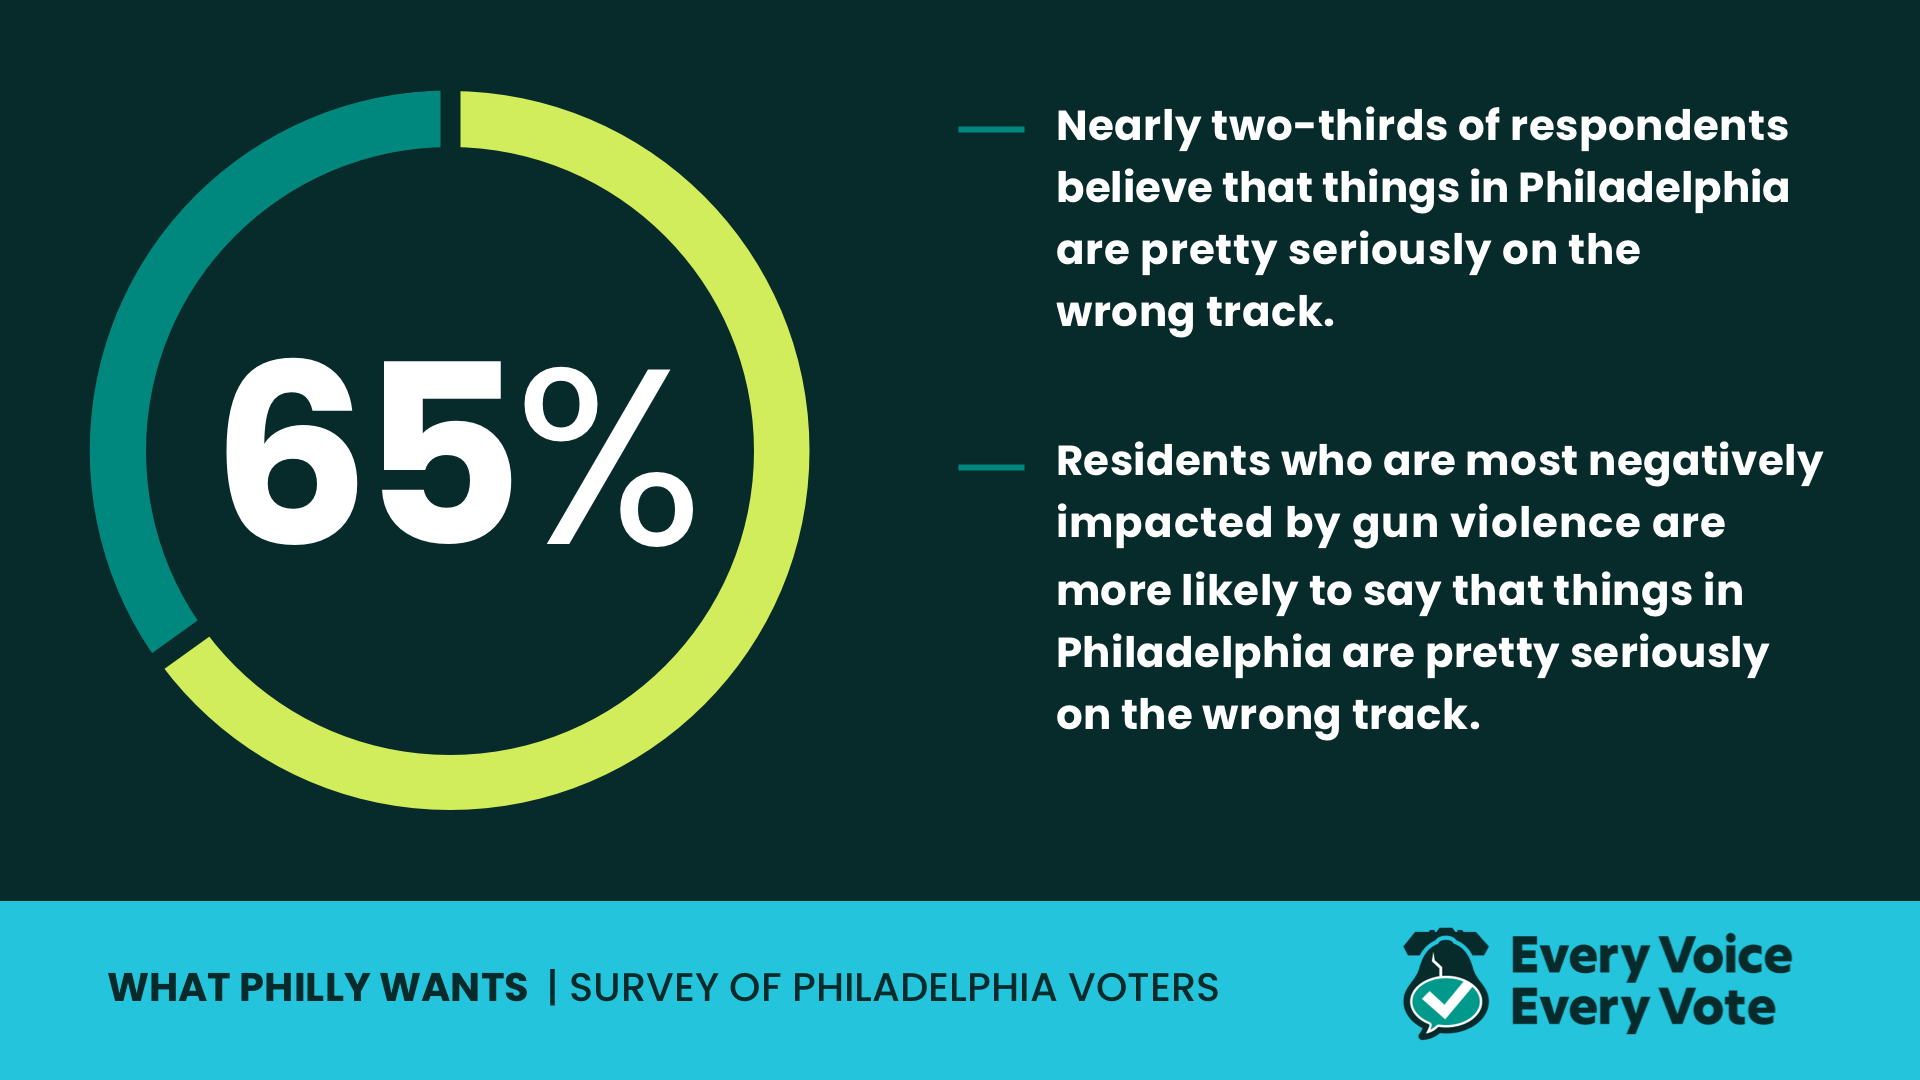 Infographic with statistic that 65% of Philadelphians believe the city is pretty seriously on the wrong track